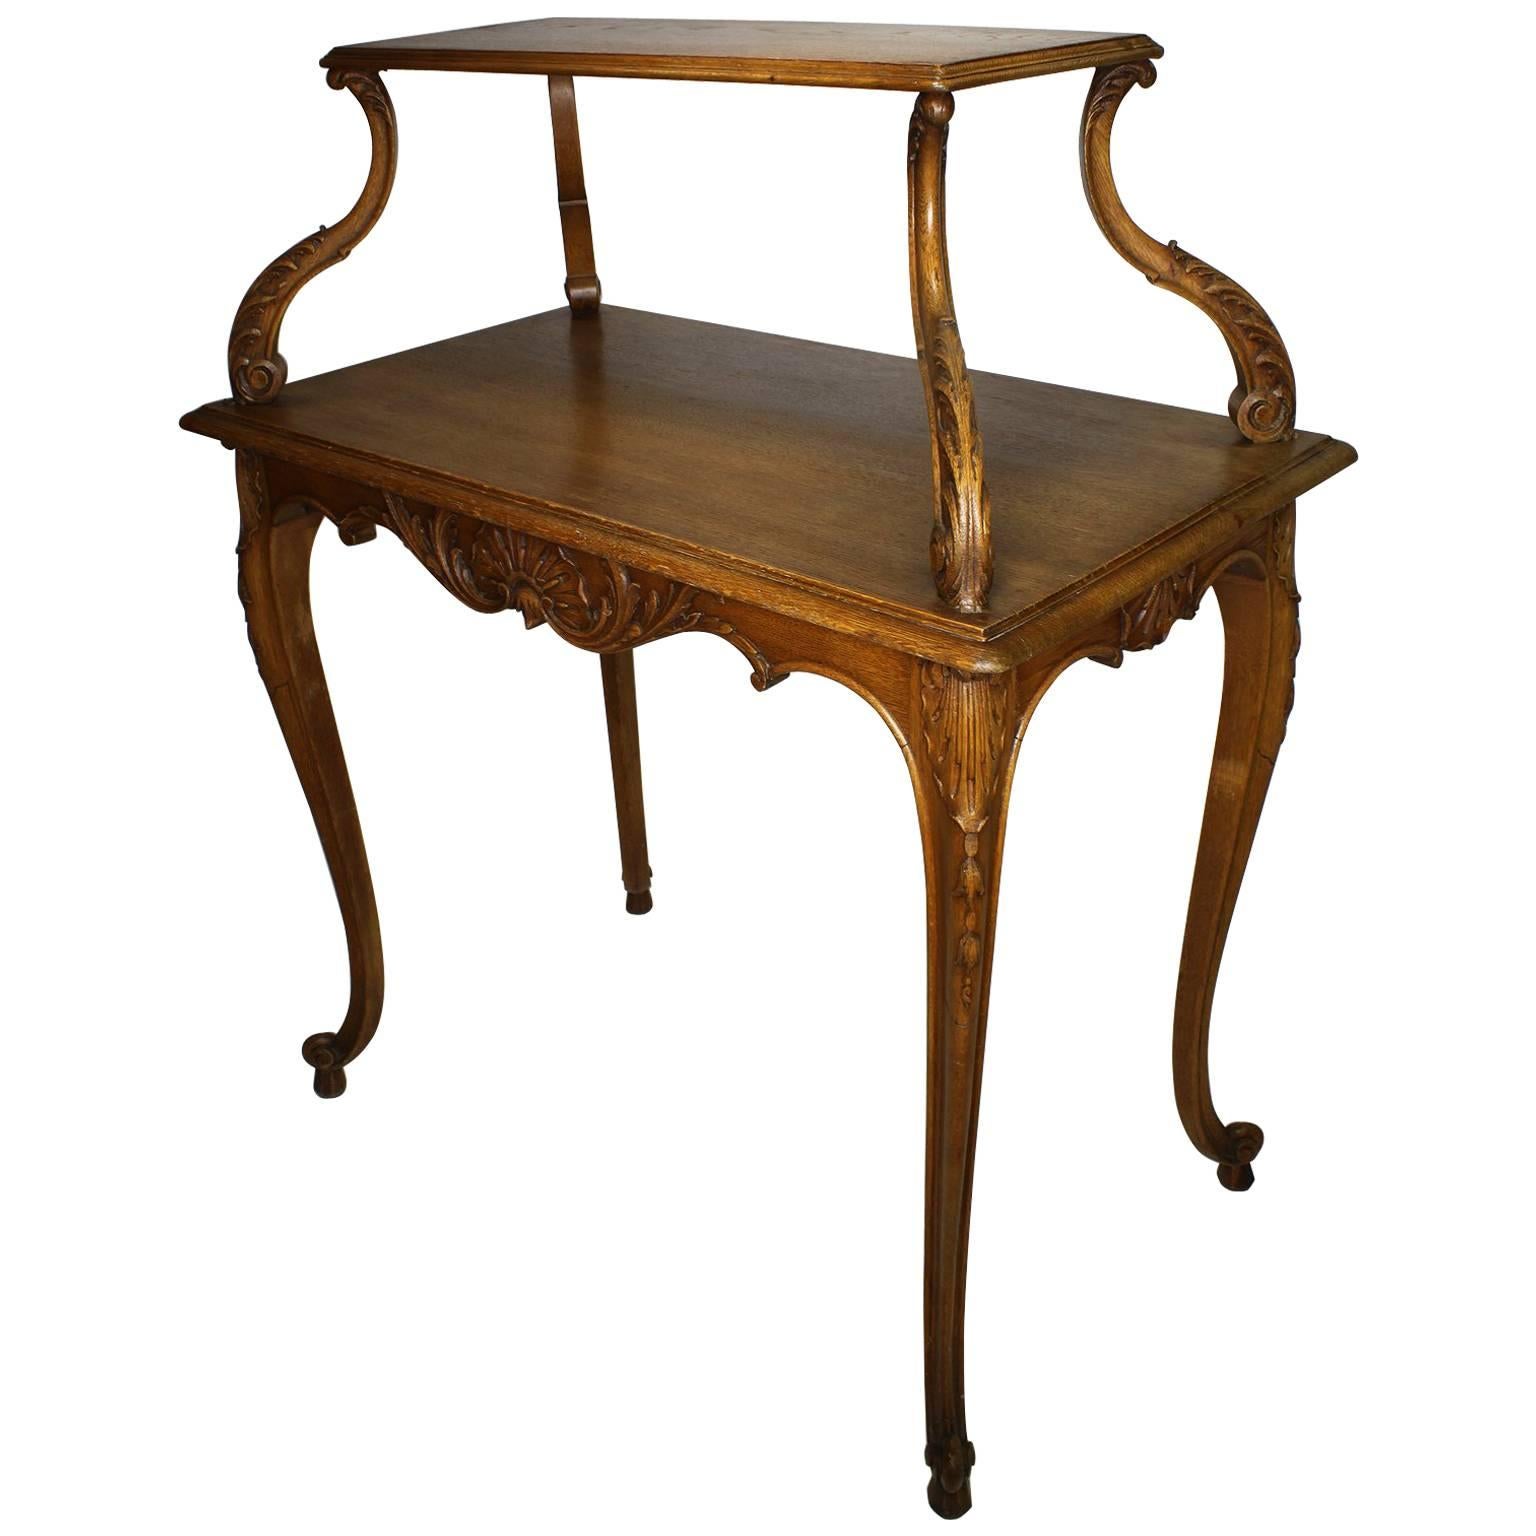 French 19th-20th Century Louis XV Style Carved Oak Two-Tier Tea or Dessert Table